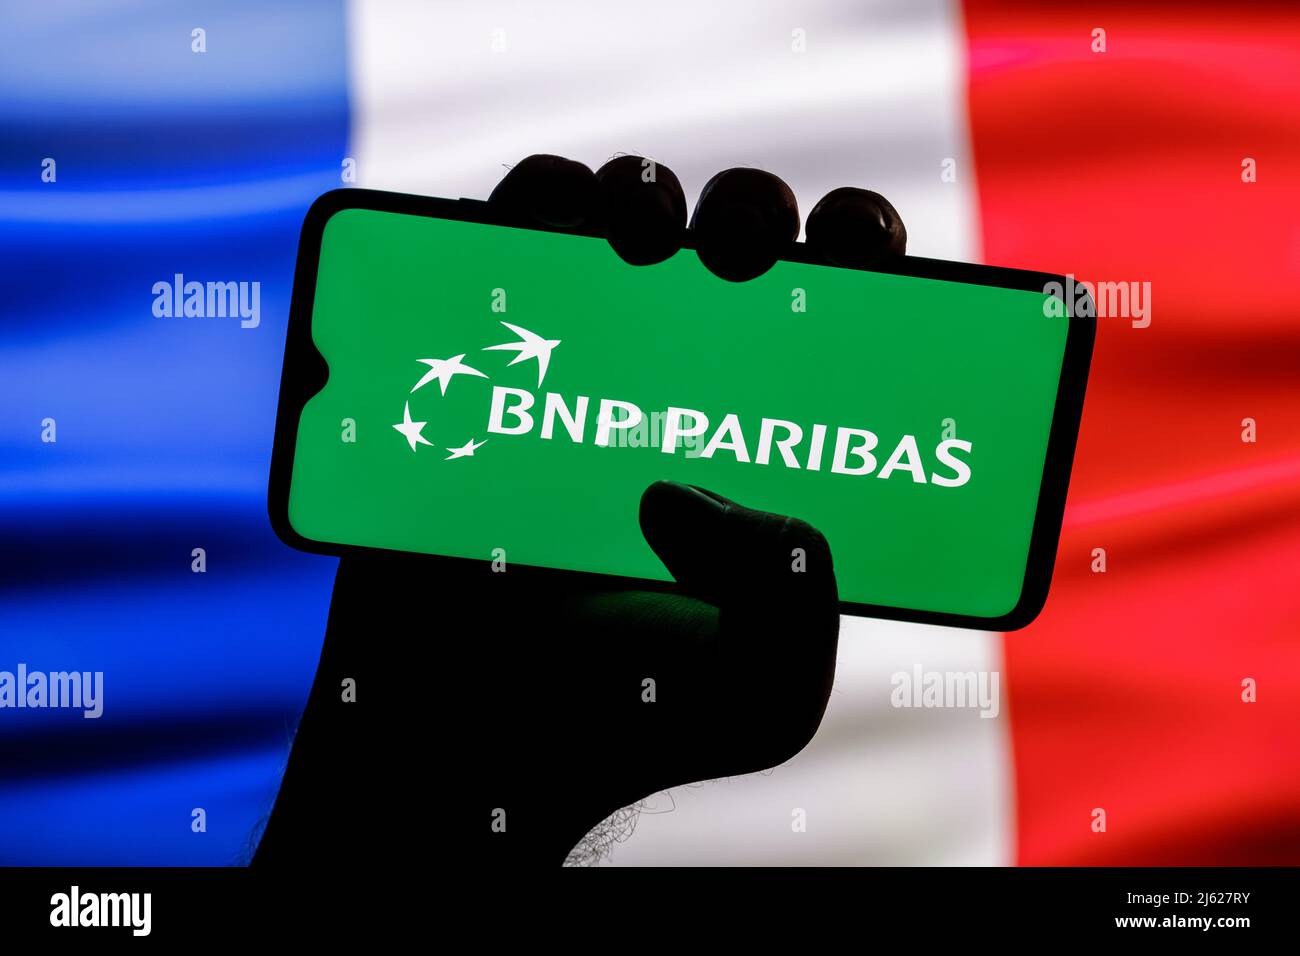 Smartphone with BNP Paribas bank logo in clenched hand on background of France flag Stock Photo